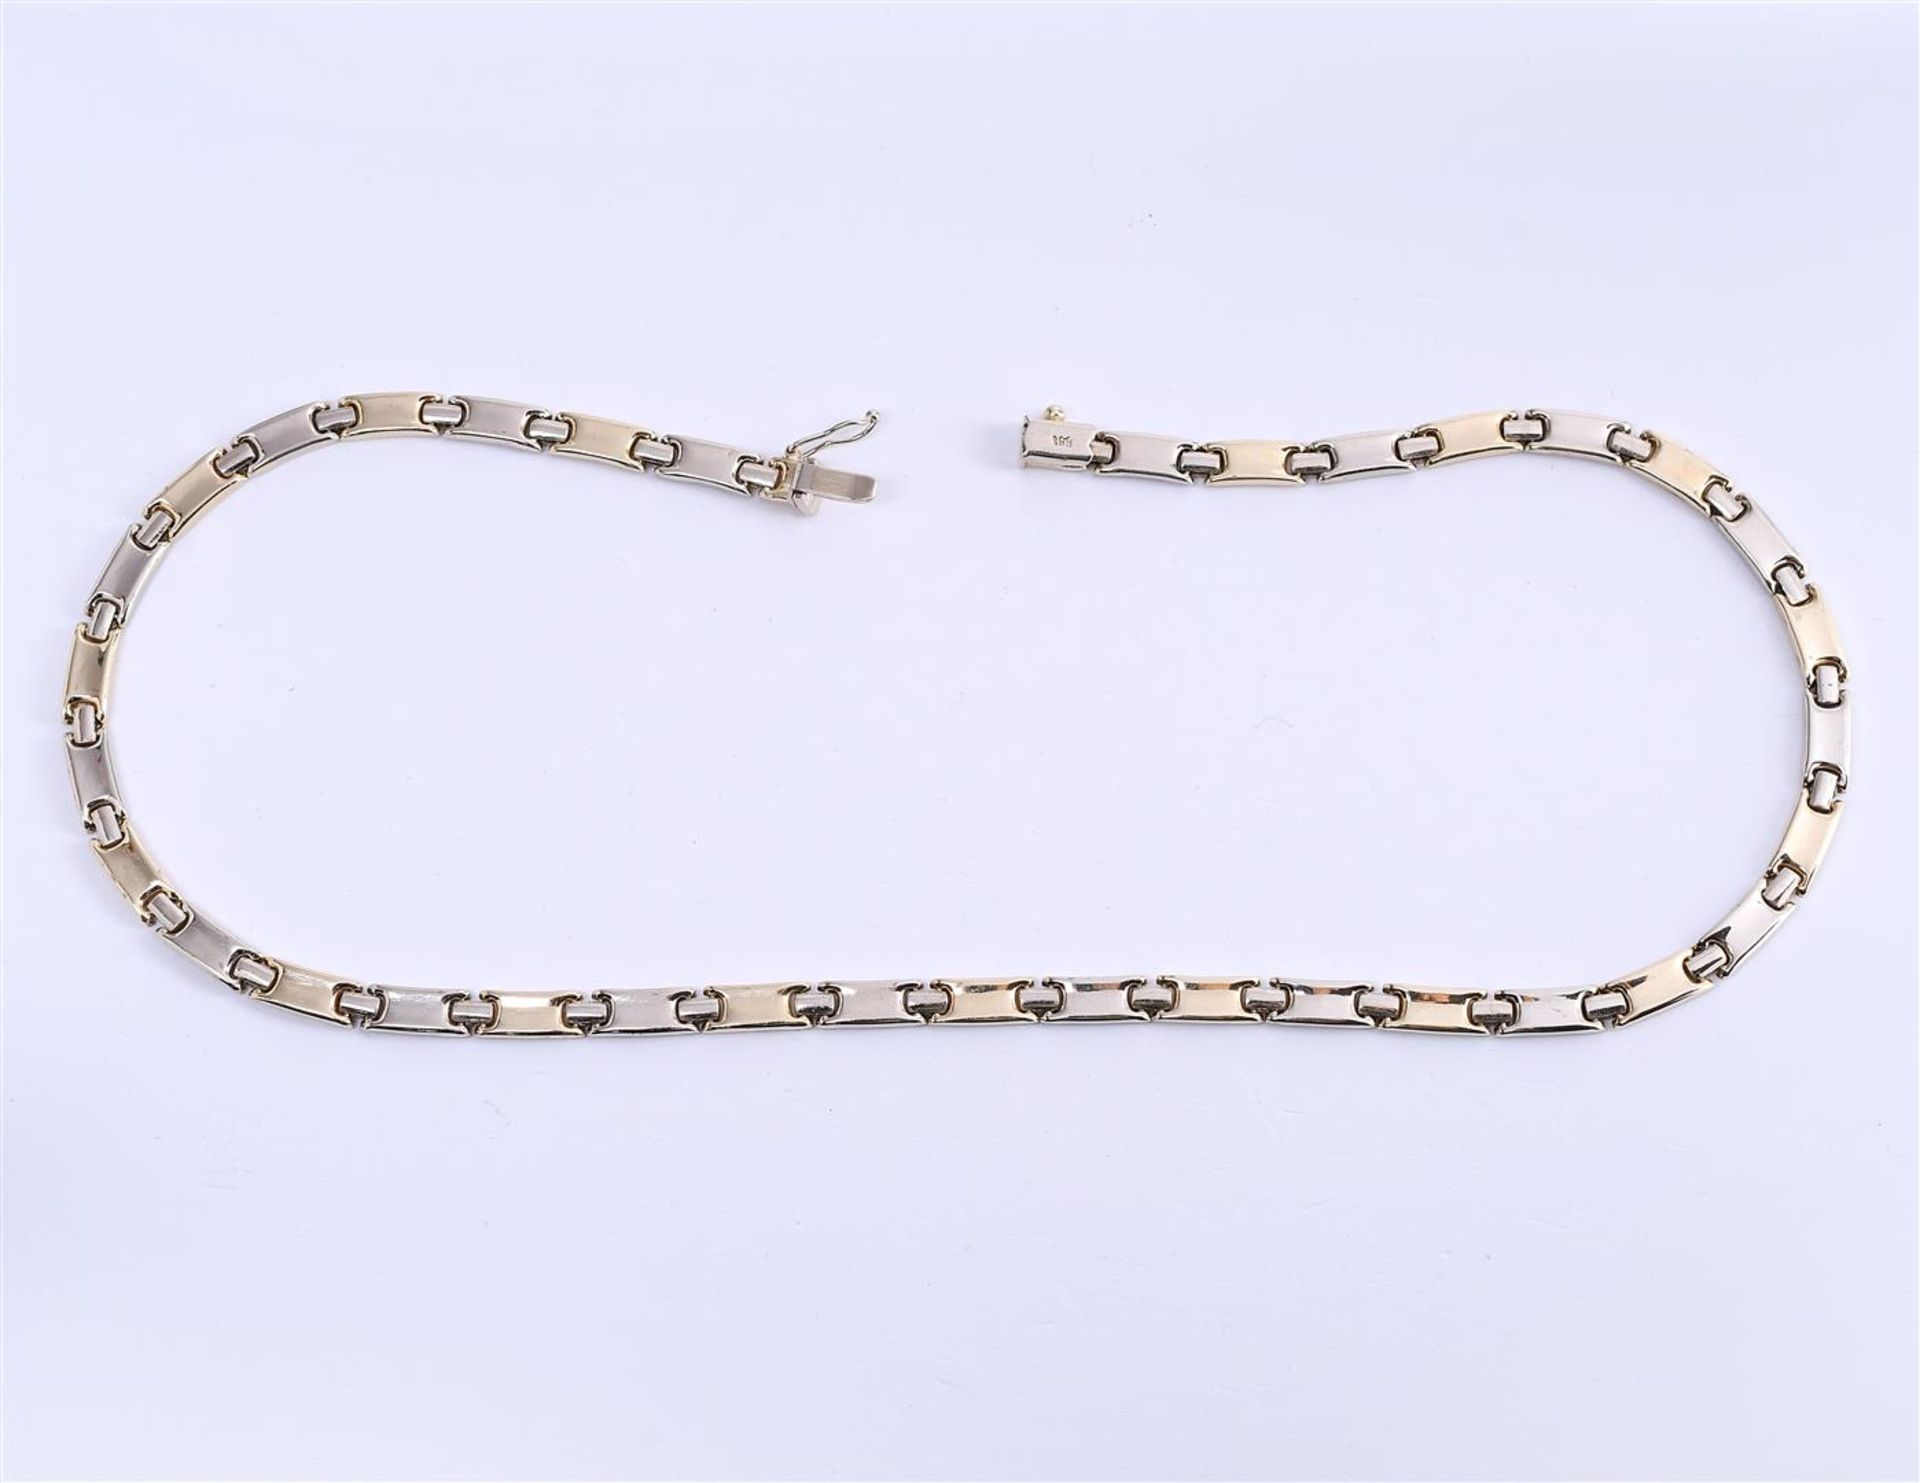 14 kt bicolor gold necklace, matte top, shiny bottom. With sliding closure - Image 3 of 5